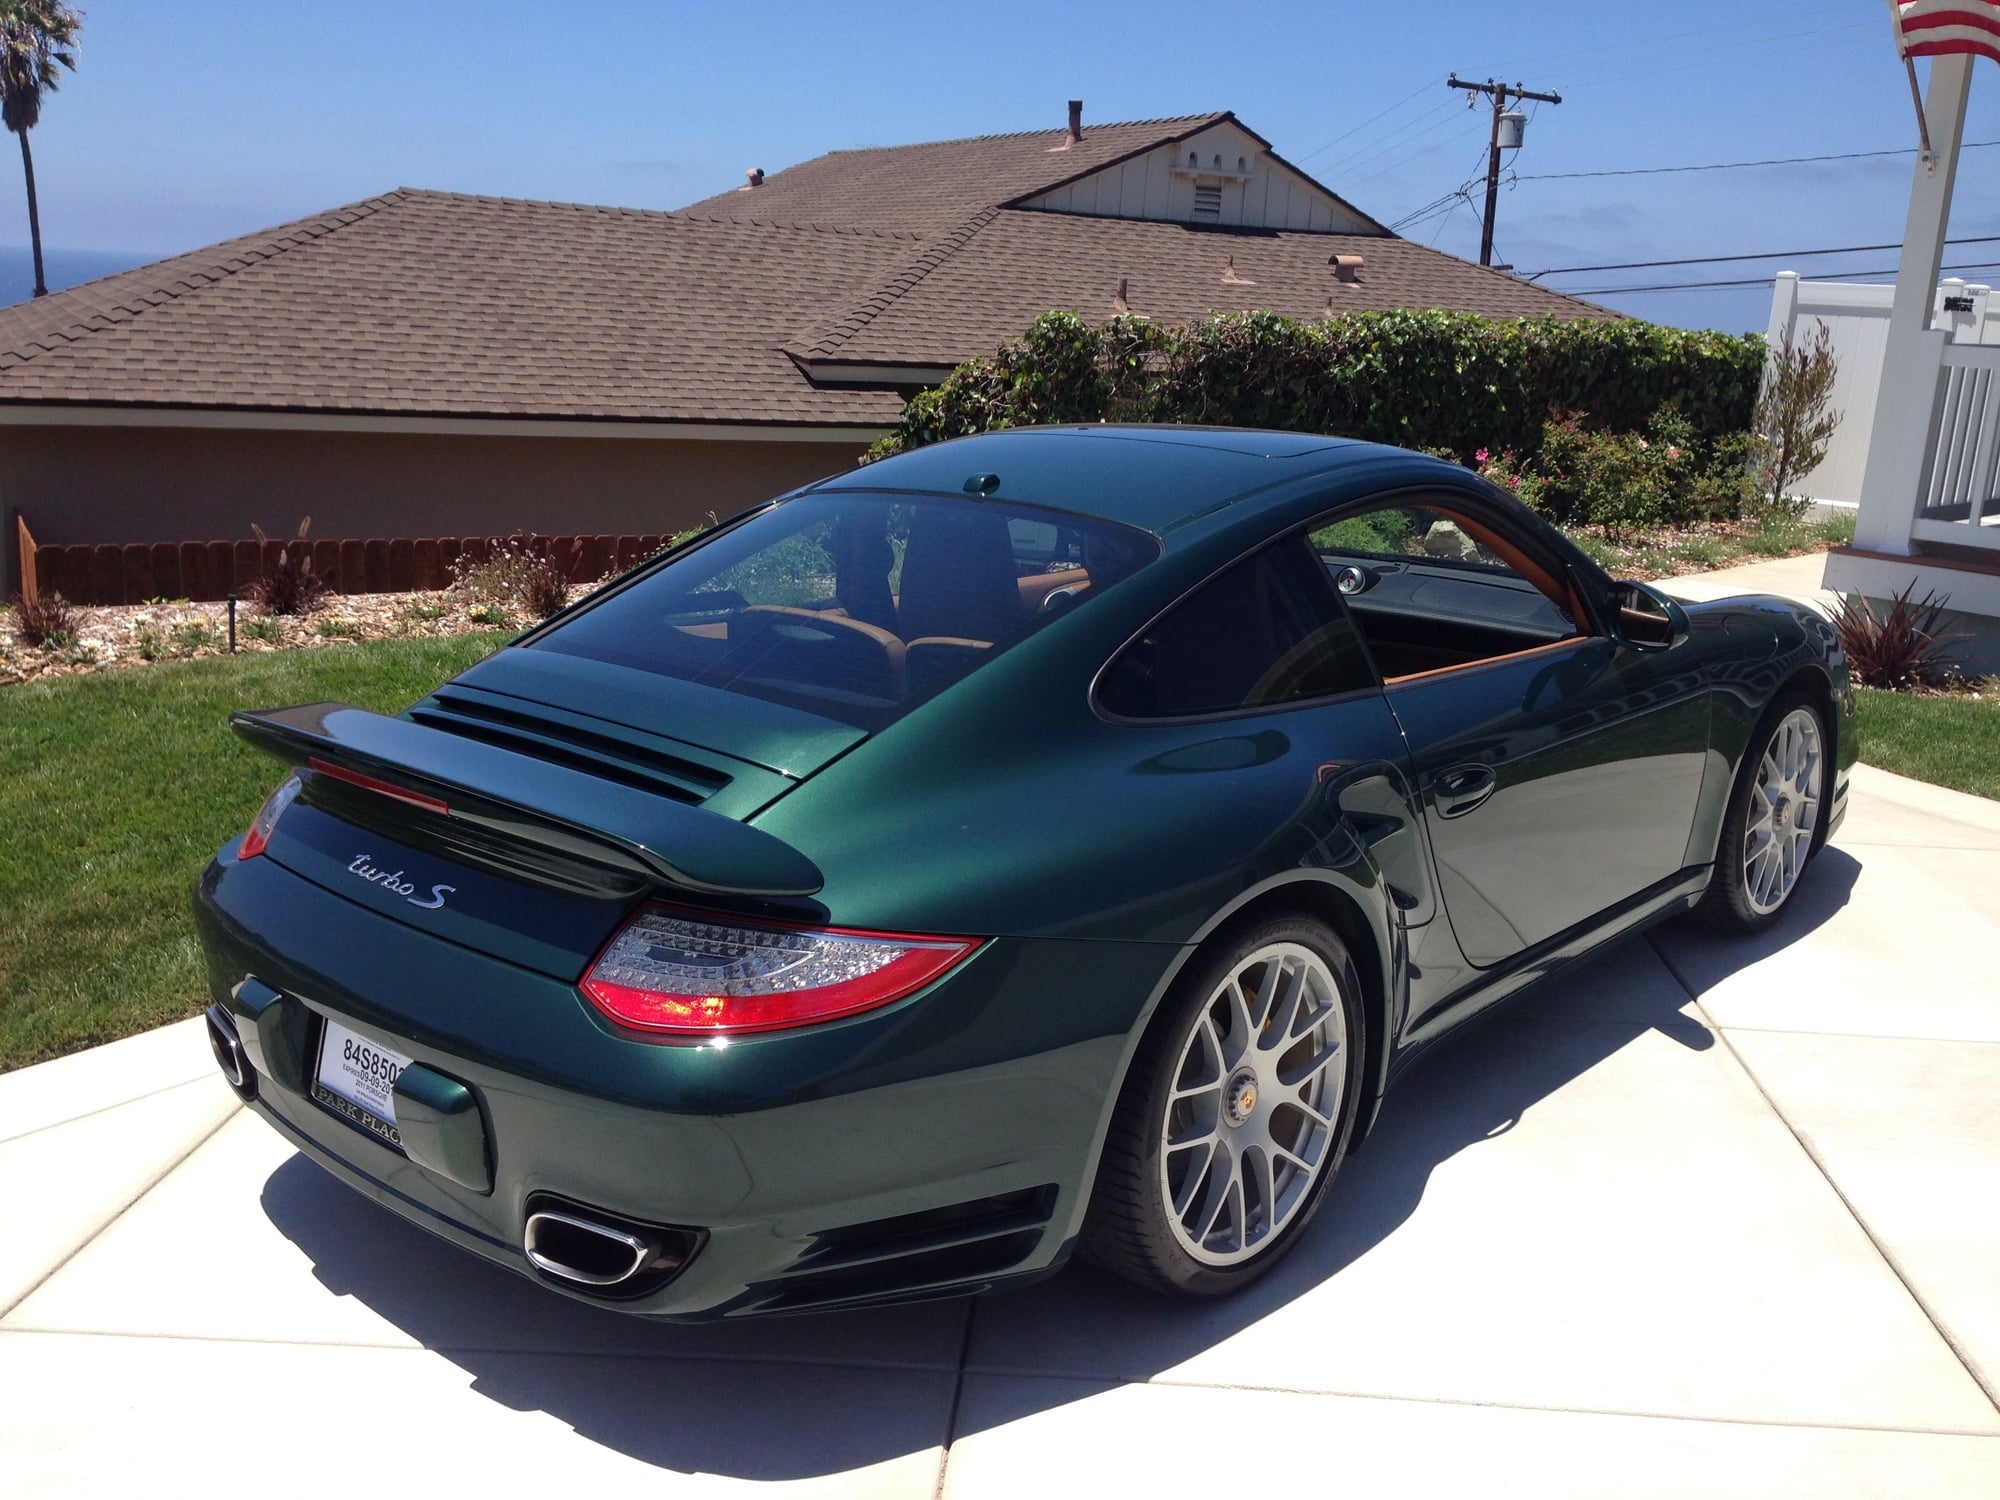 2011 Porsche 911 - 2011 997.2 Turbo S - Used - VIN WP0AD2A98BS766843 - 19,180 Miles - 6 cyl - AWD - Automatic - Coupe - Other - Redondo Beach, CA 90277, United States